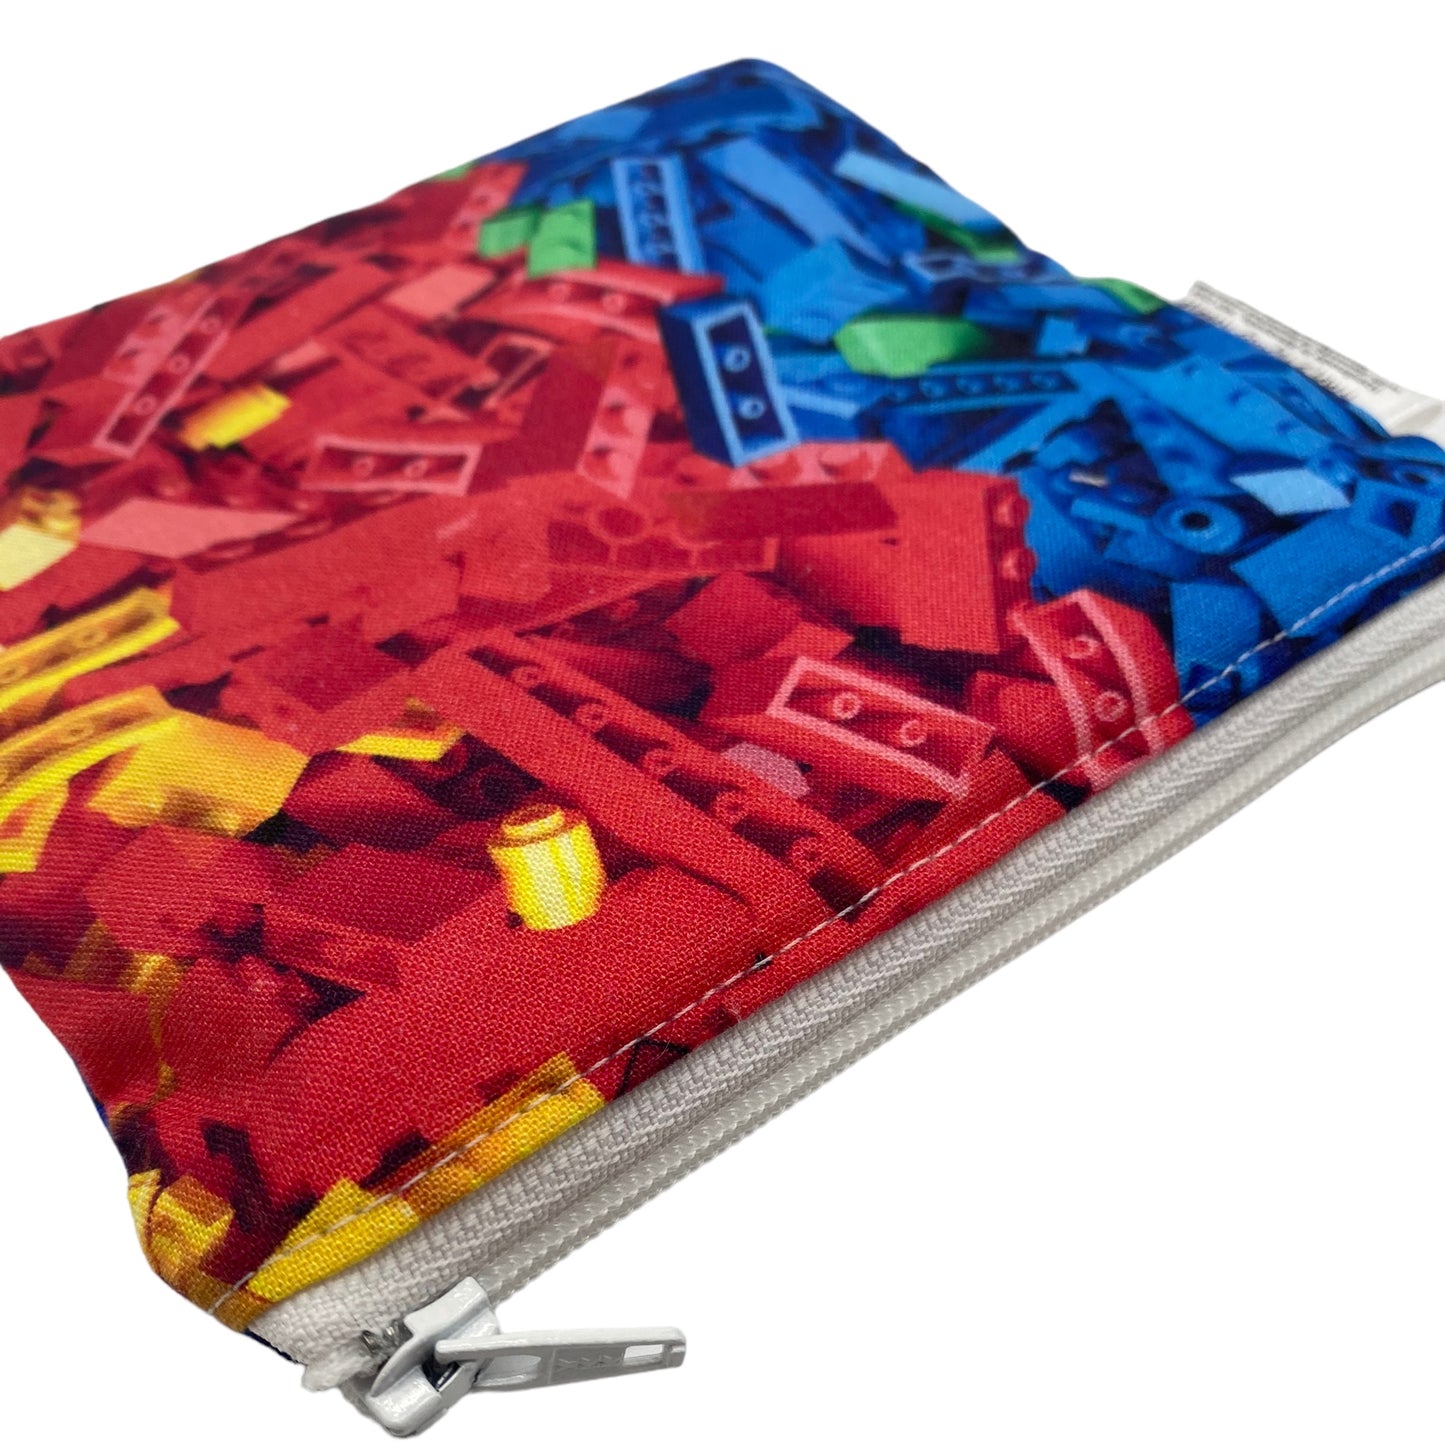 Toddler Sized Reusable Zippered Bag Building Bricks Primary